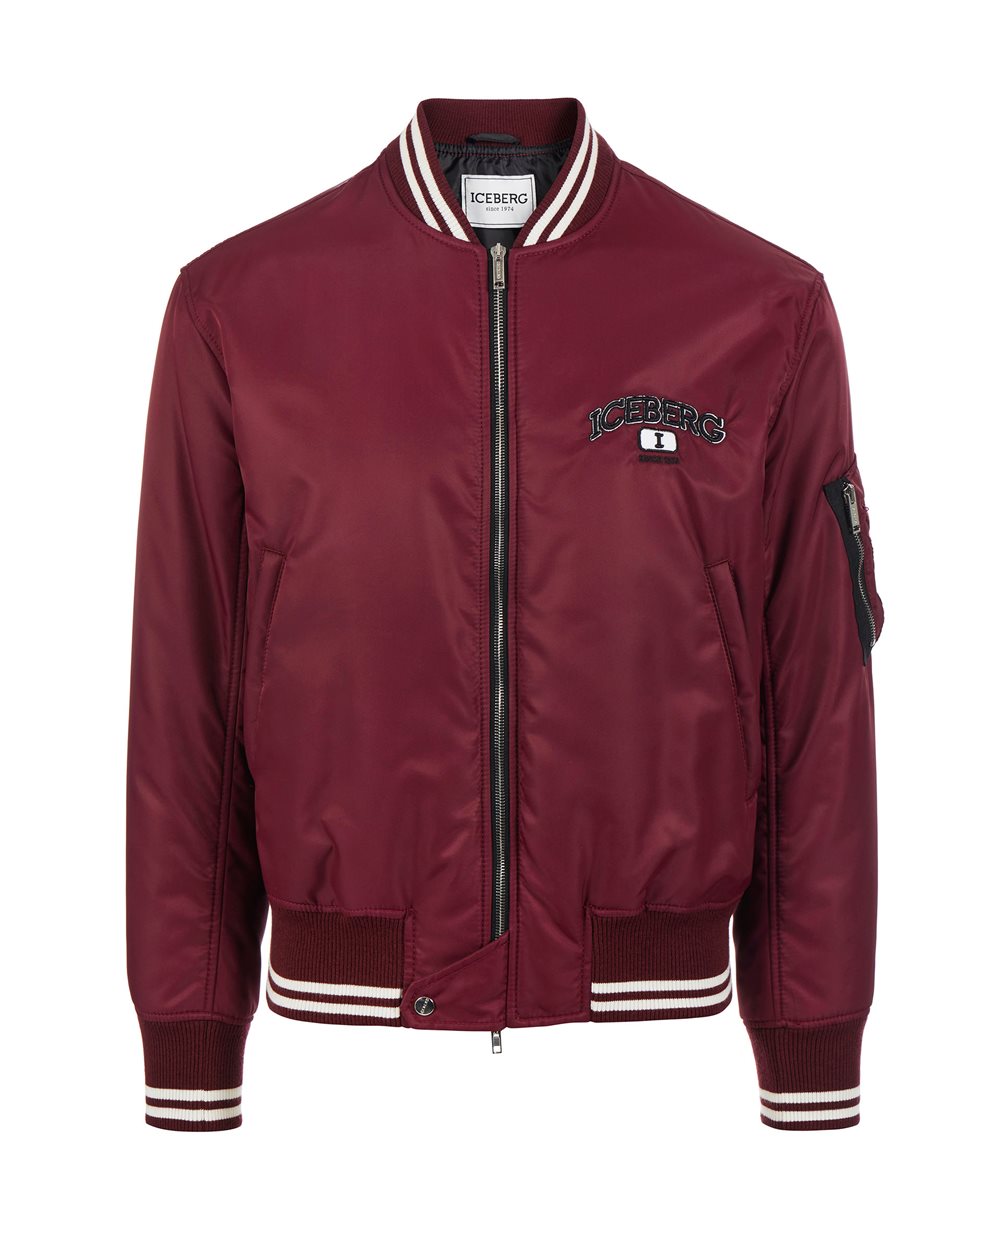 Bomber jacket with logo - ( SECONDO STEP IT ) PROMO SALDI UP TO 40% | Iceberg - Official Website